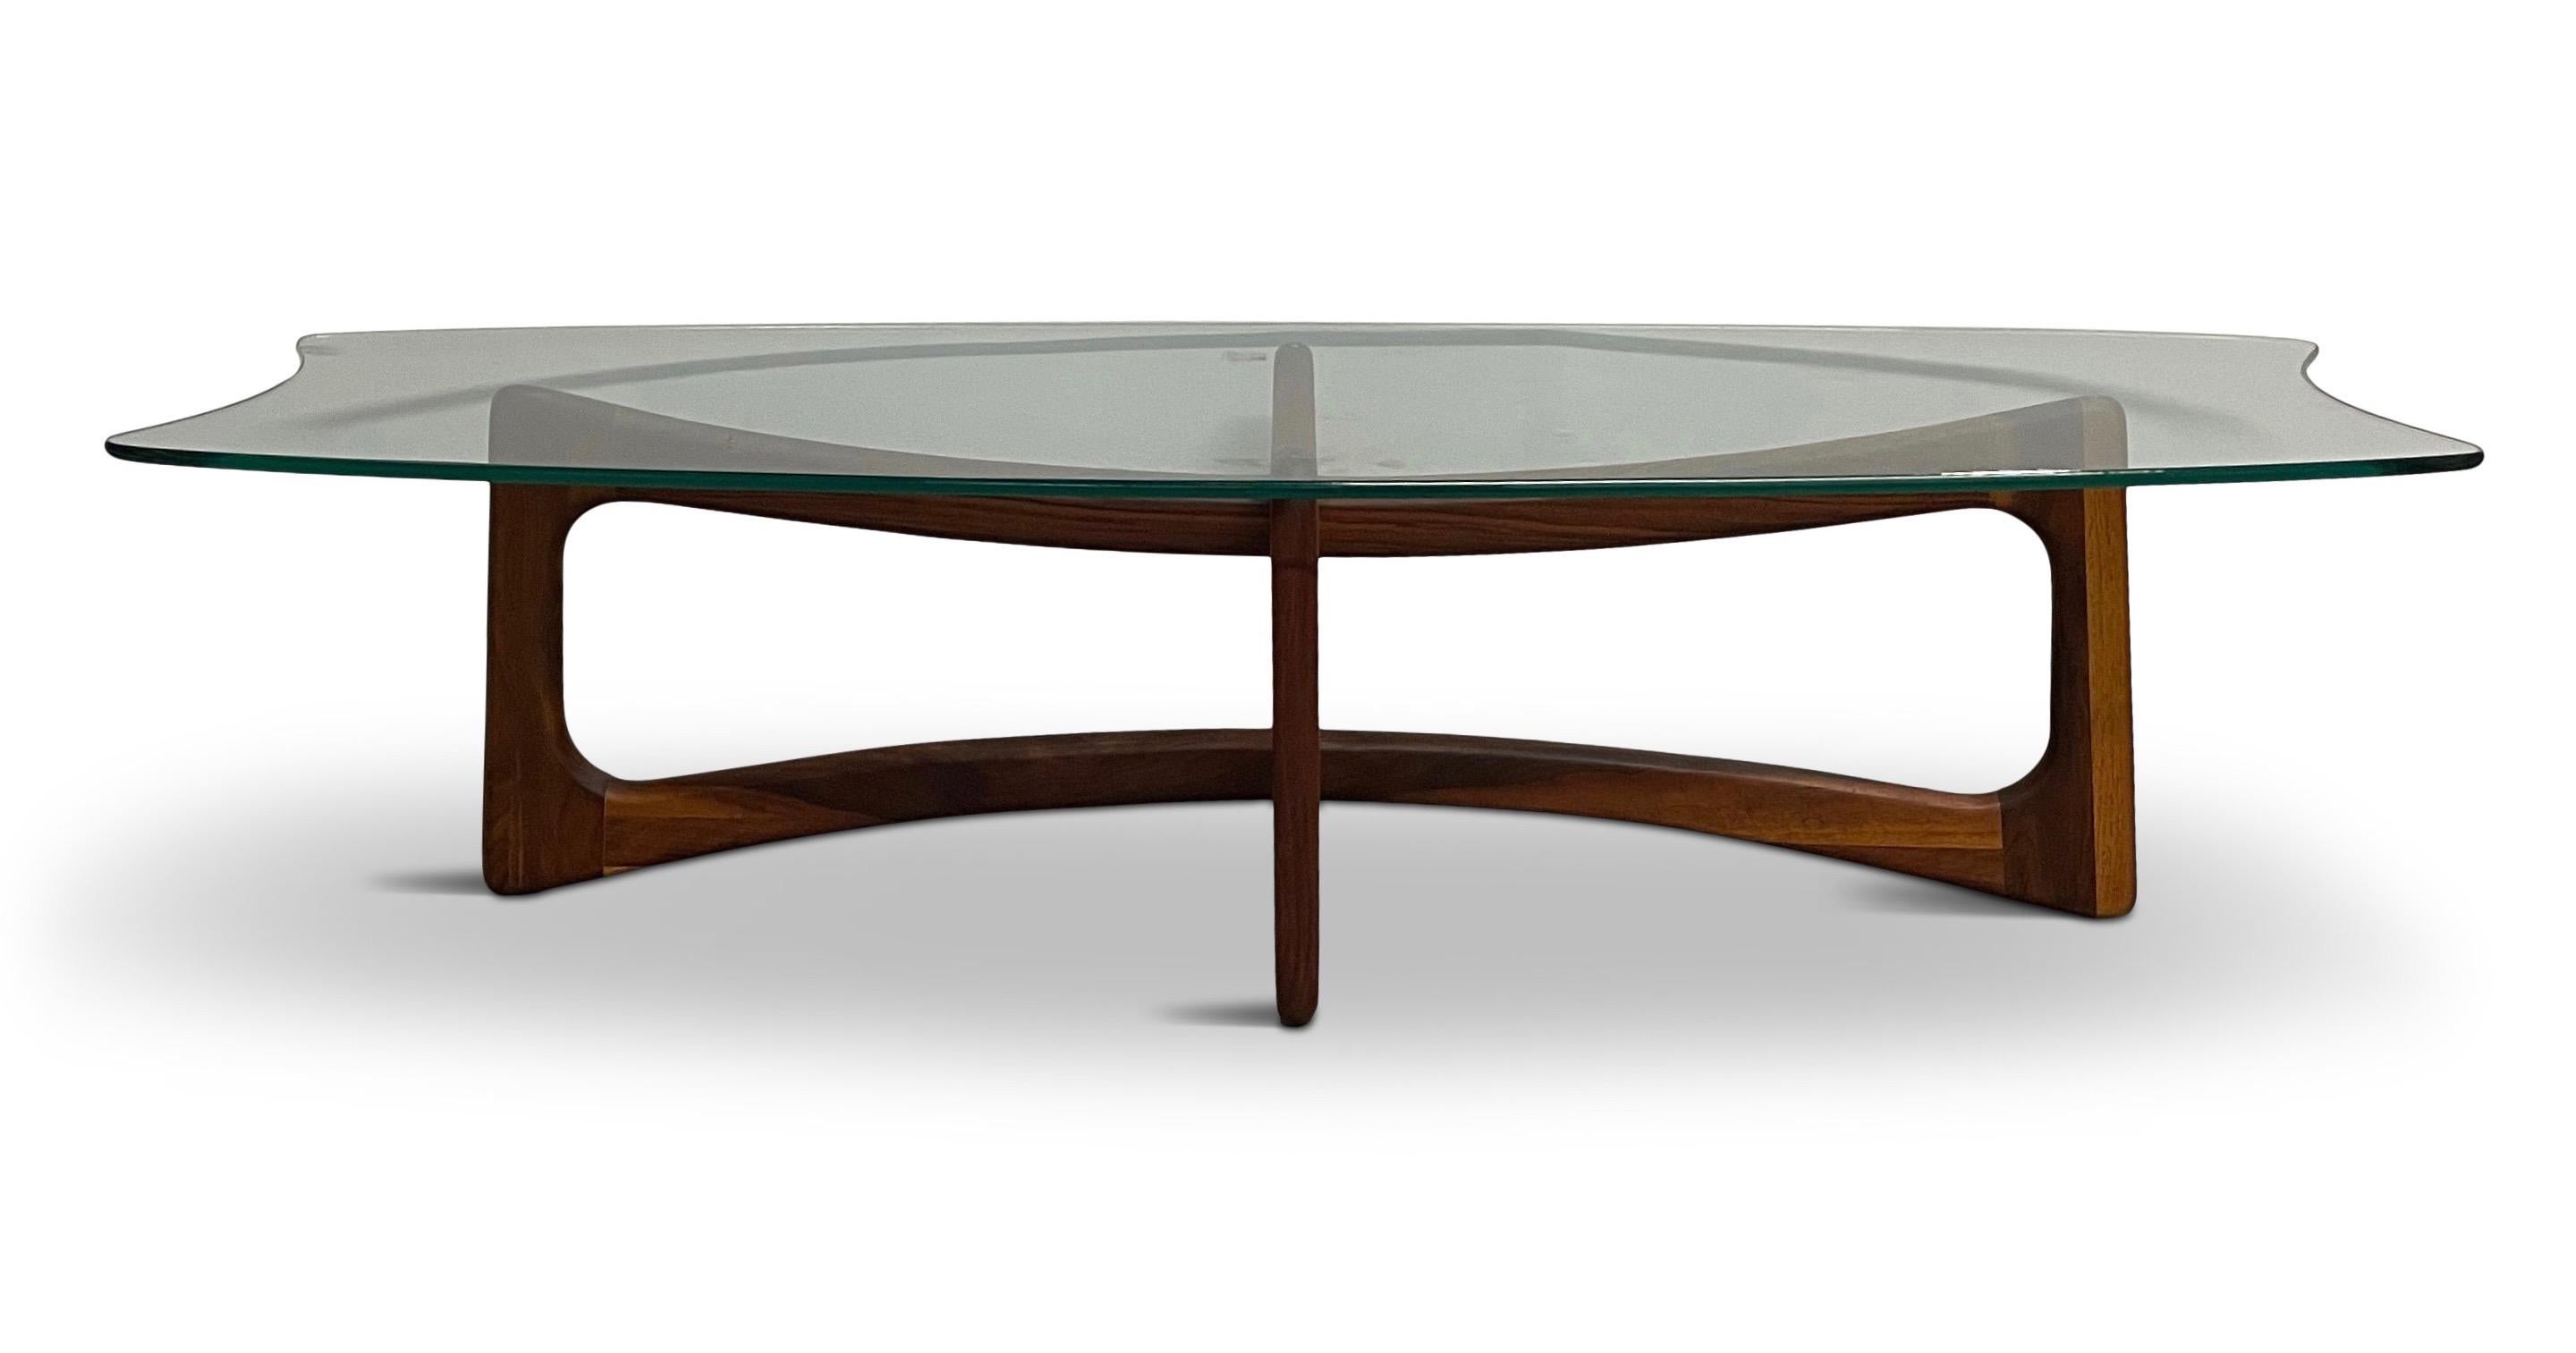 Classic Adrian Pearsall coffee table with a walnut base and interesting shark fin glass top.